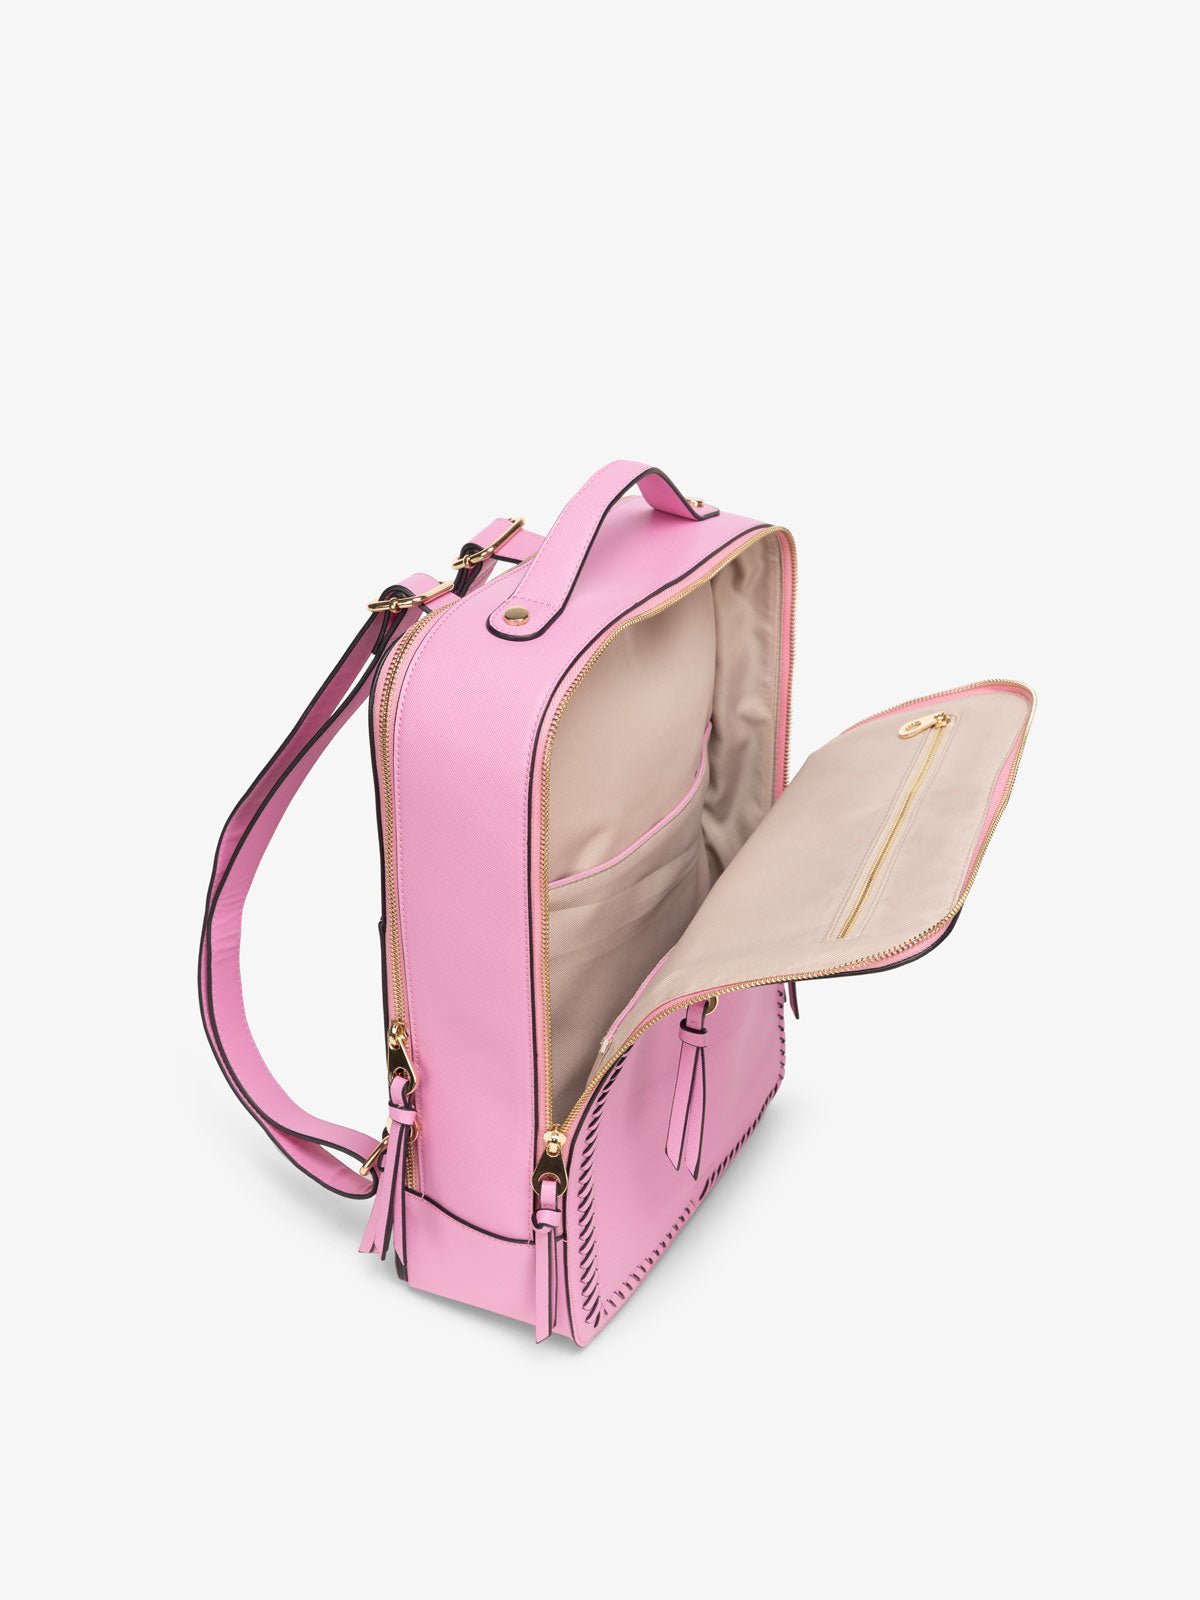 Kaya laptop backpack top view in pink guava